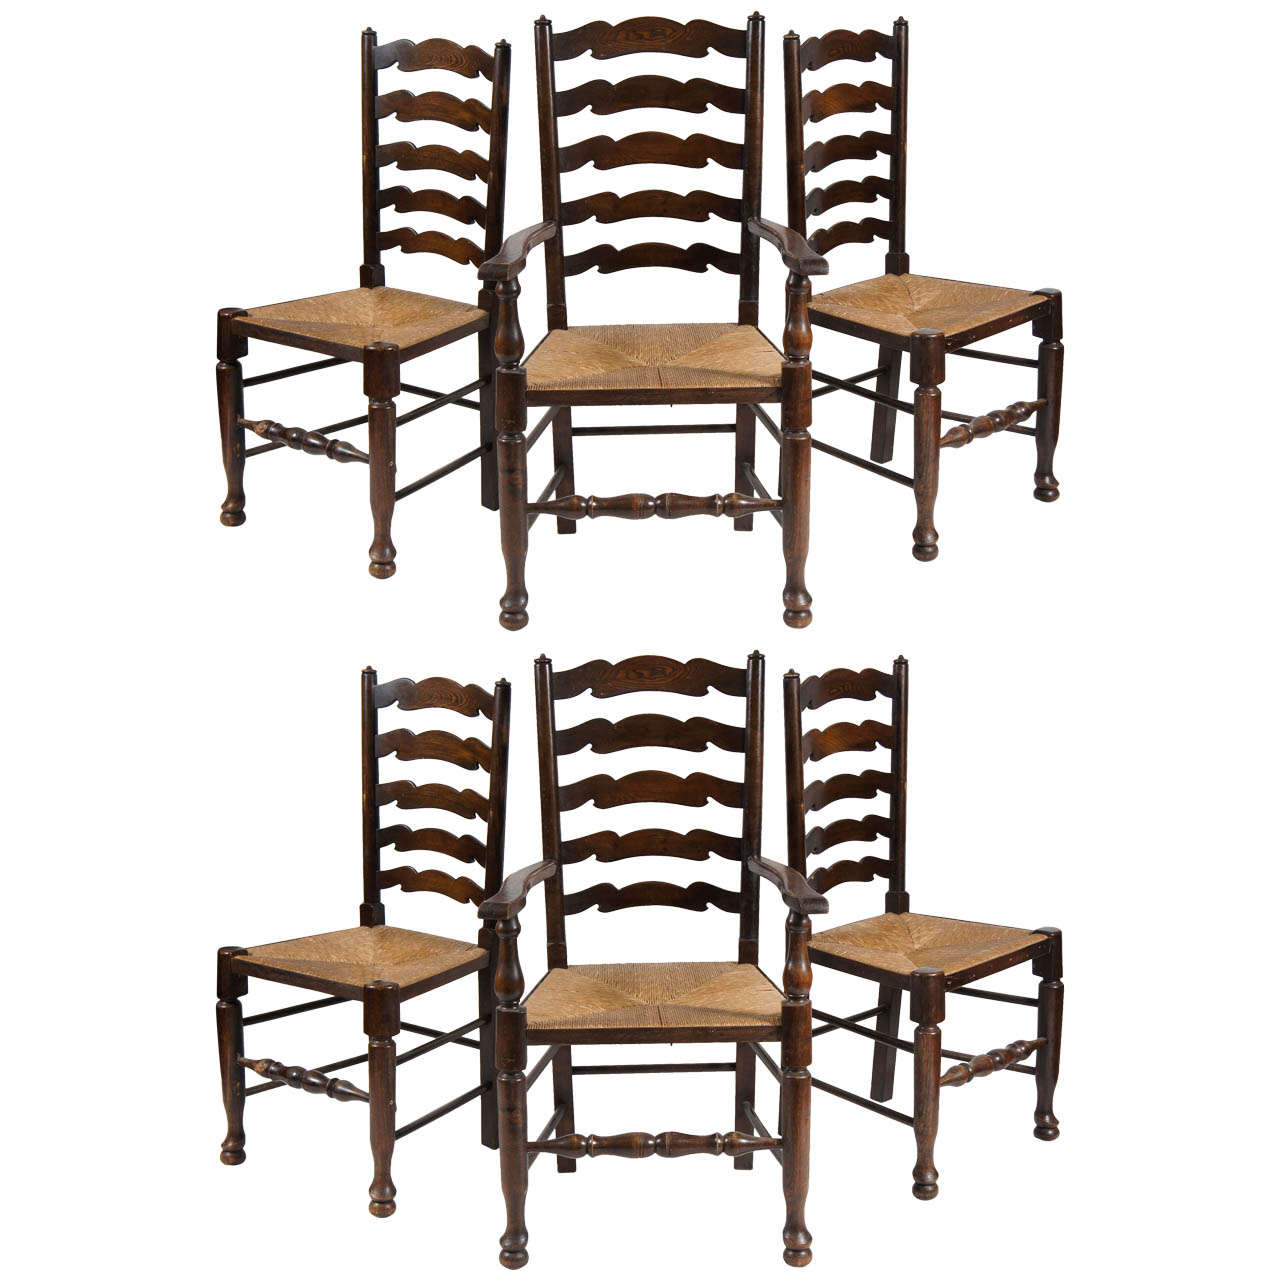 Six English Ladder Back Dining Chairs